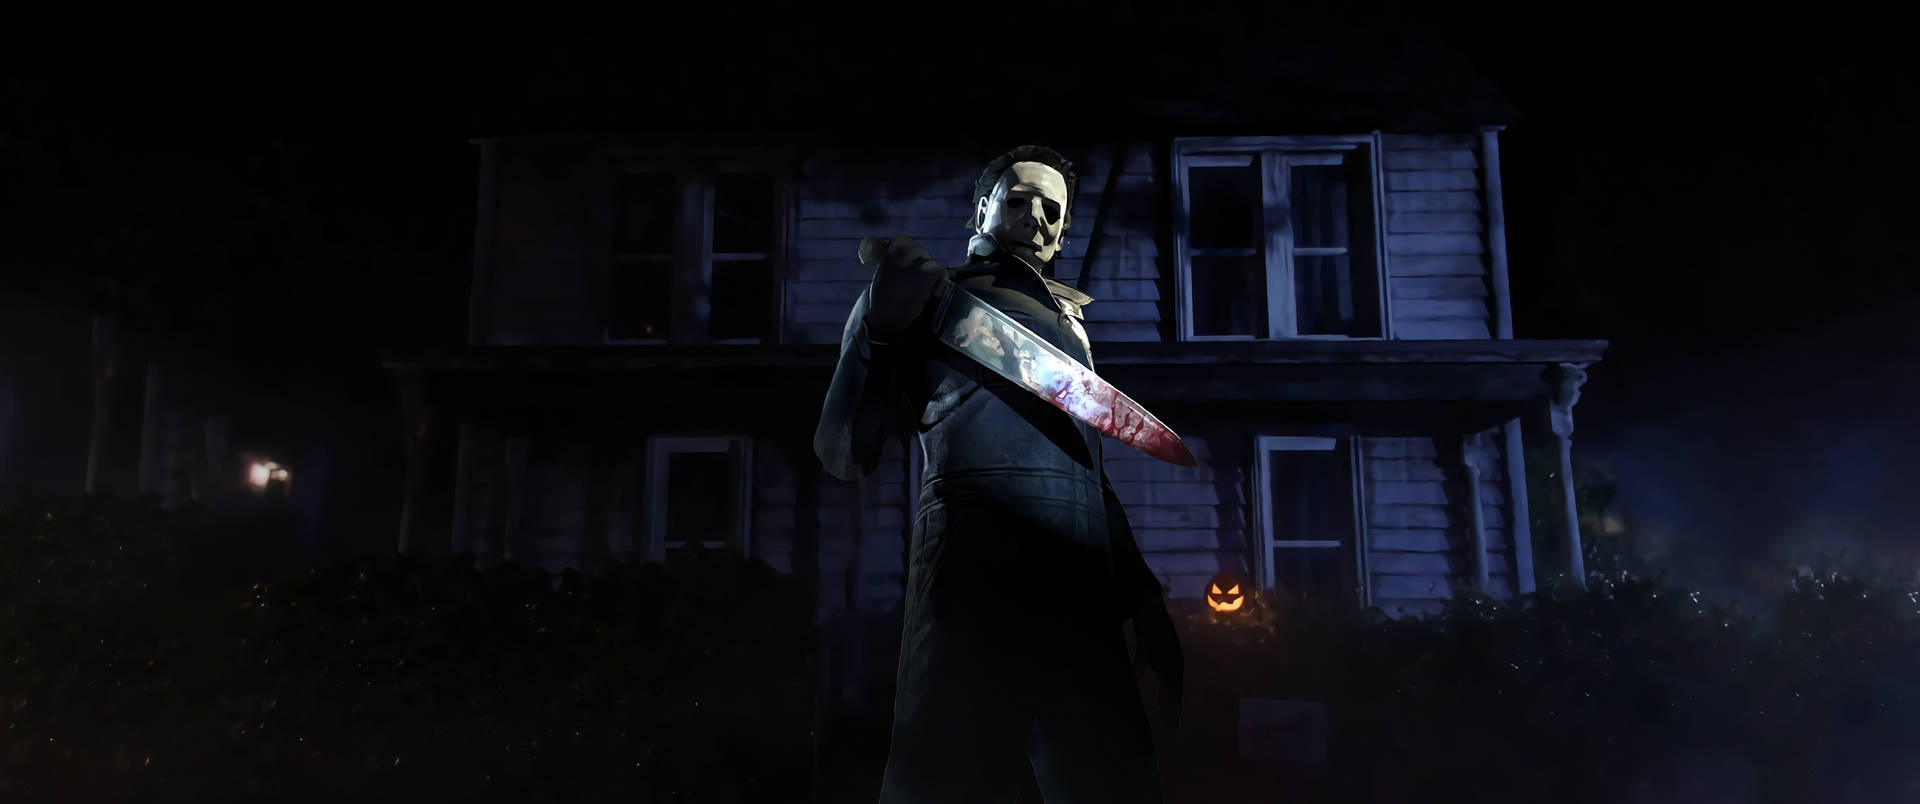 Michael Myers Dead By Daylight Background